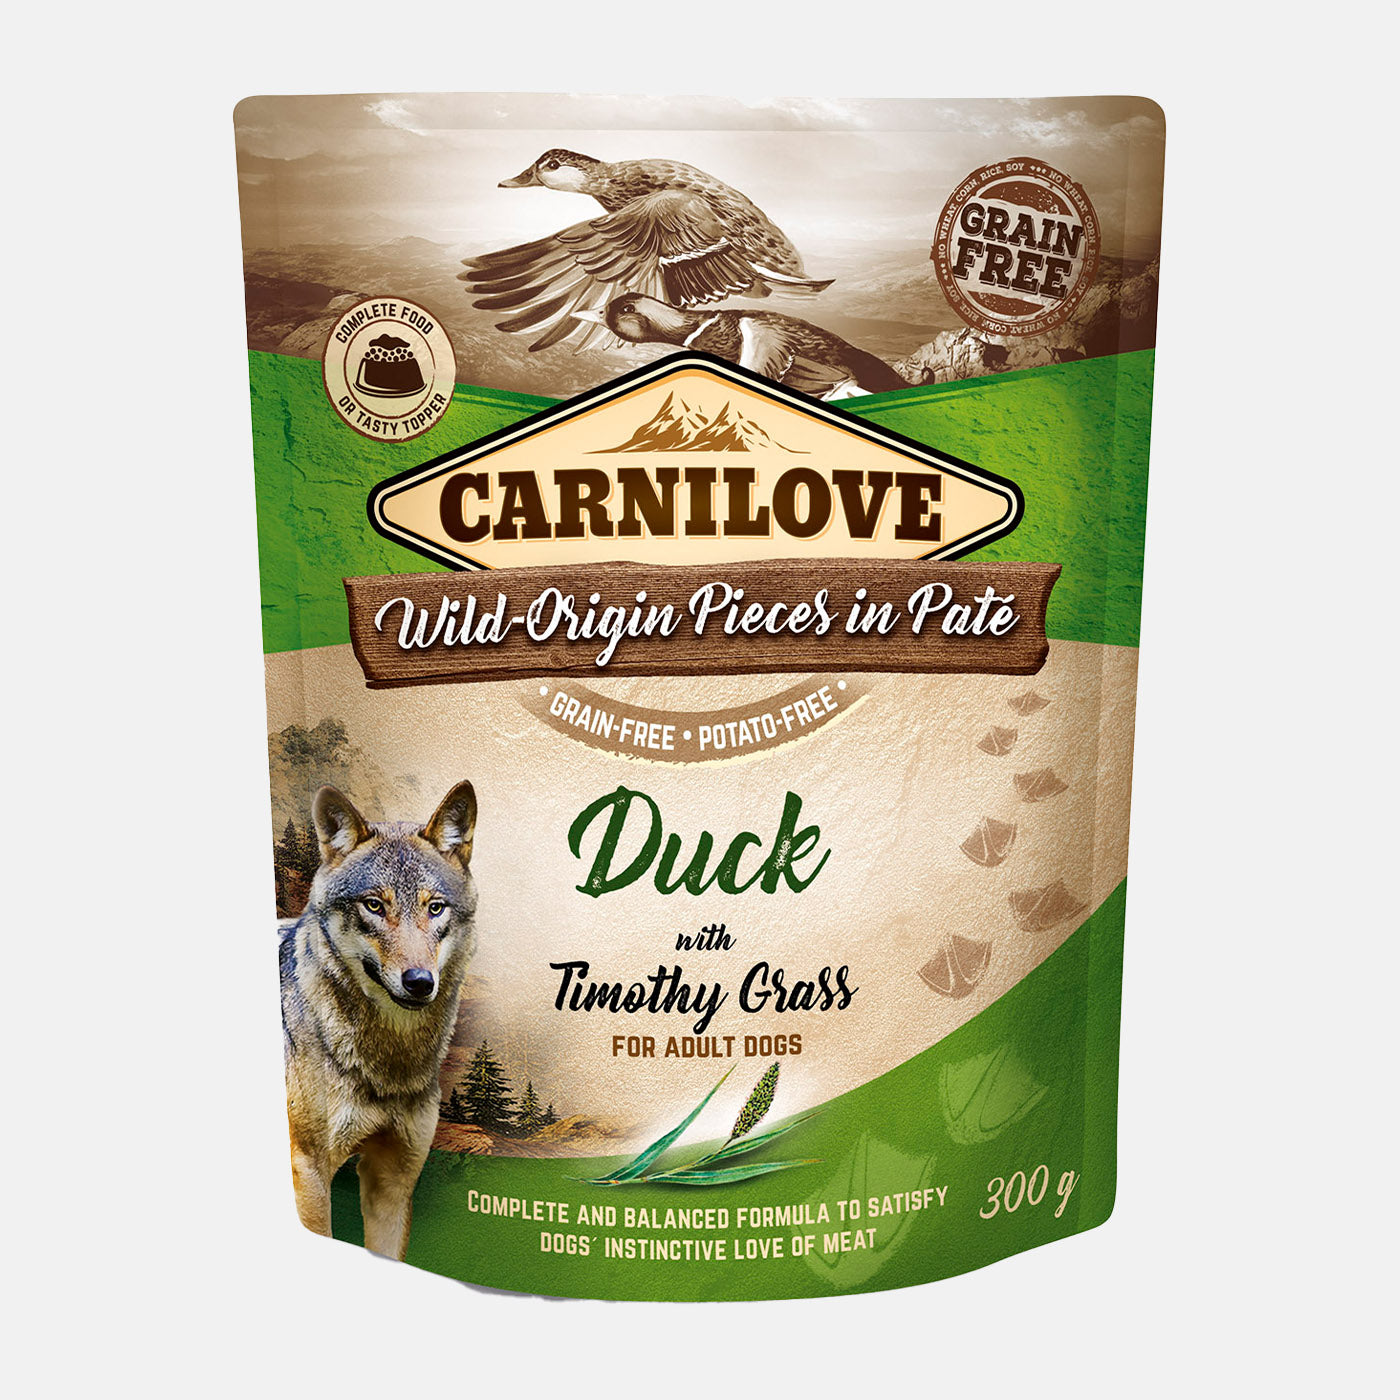 Carnilove Duck with Timothy Grass Dog Food (12x300g)